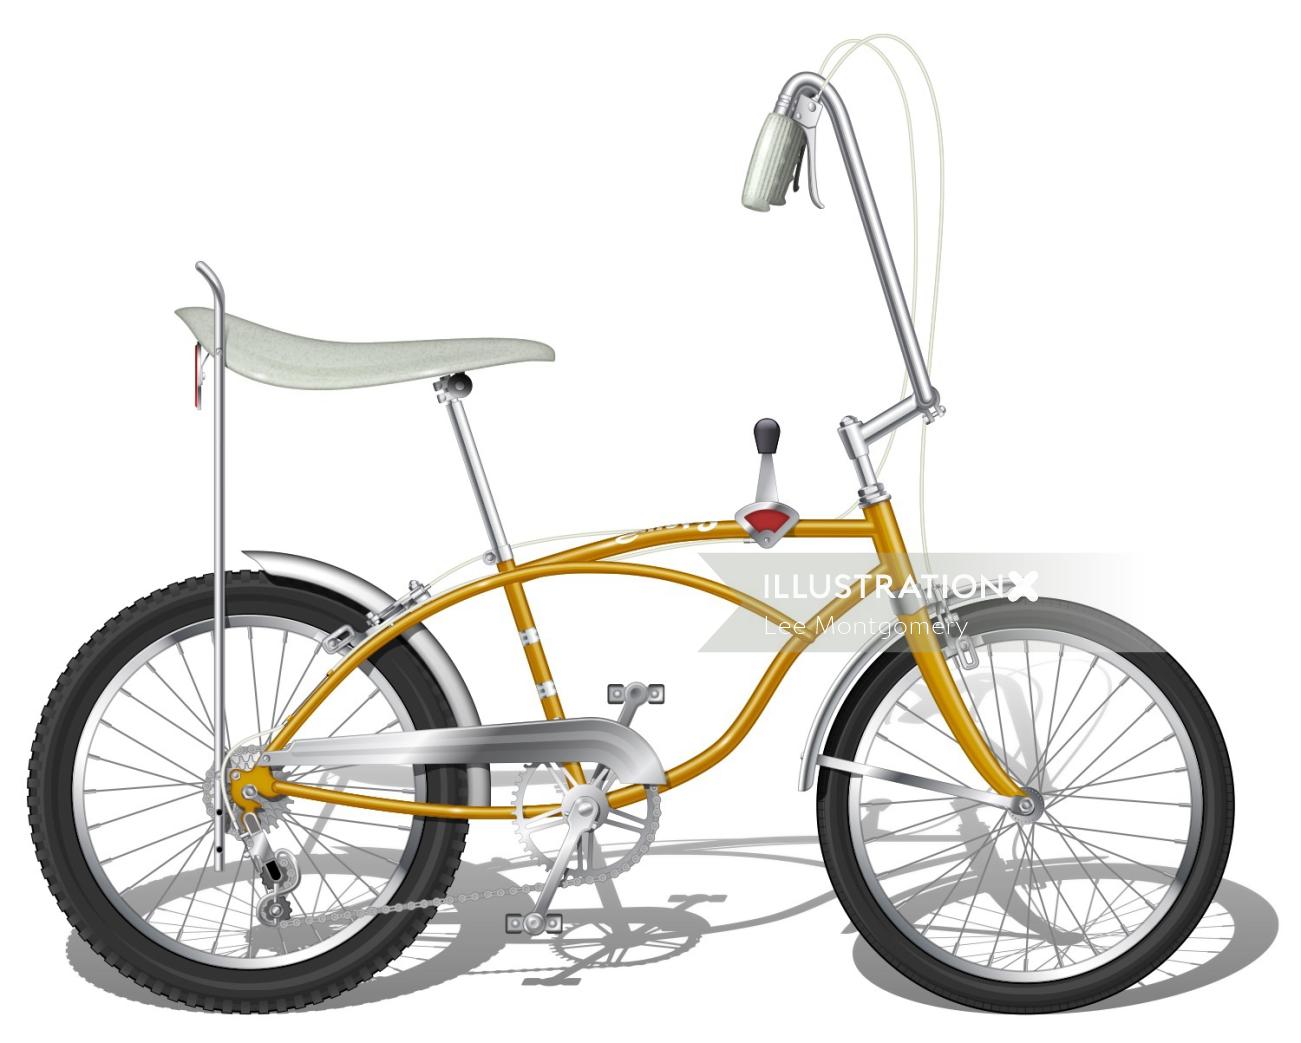 Illustration of Steyr-Puch bicycle